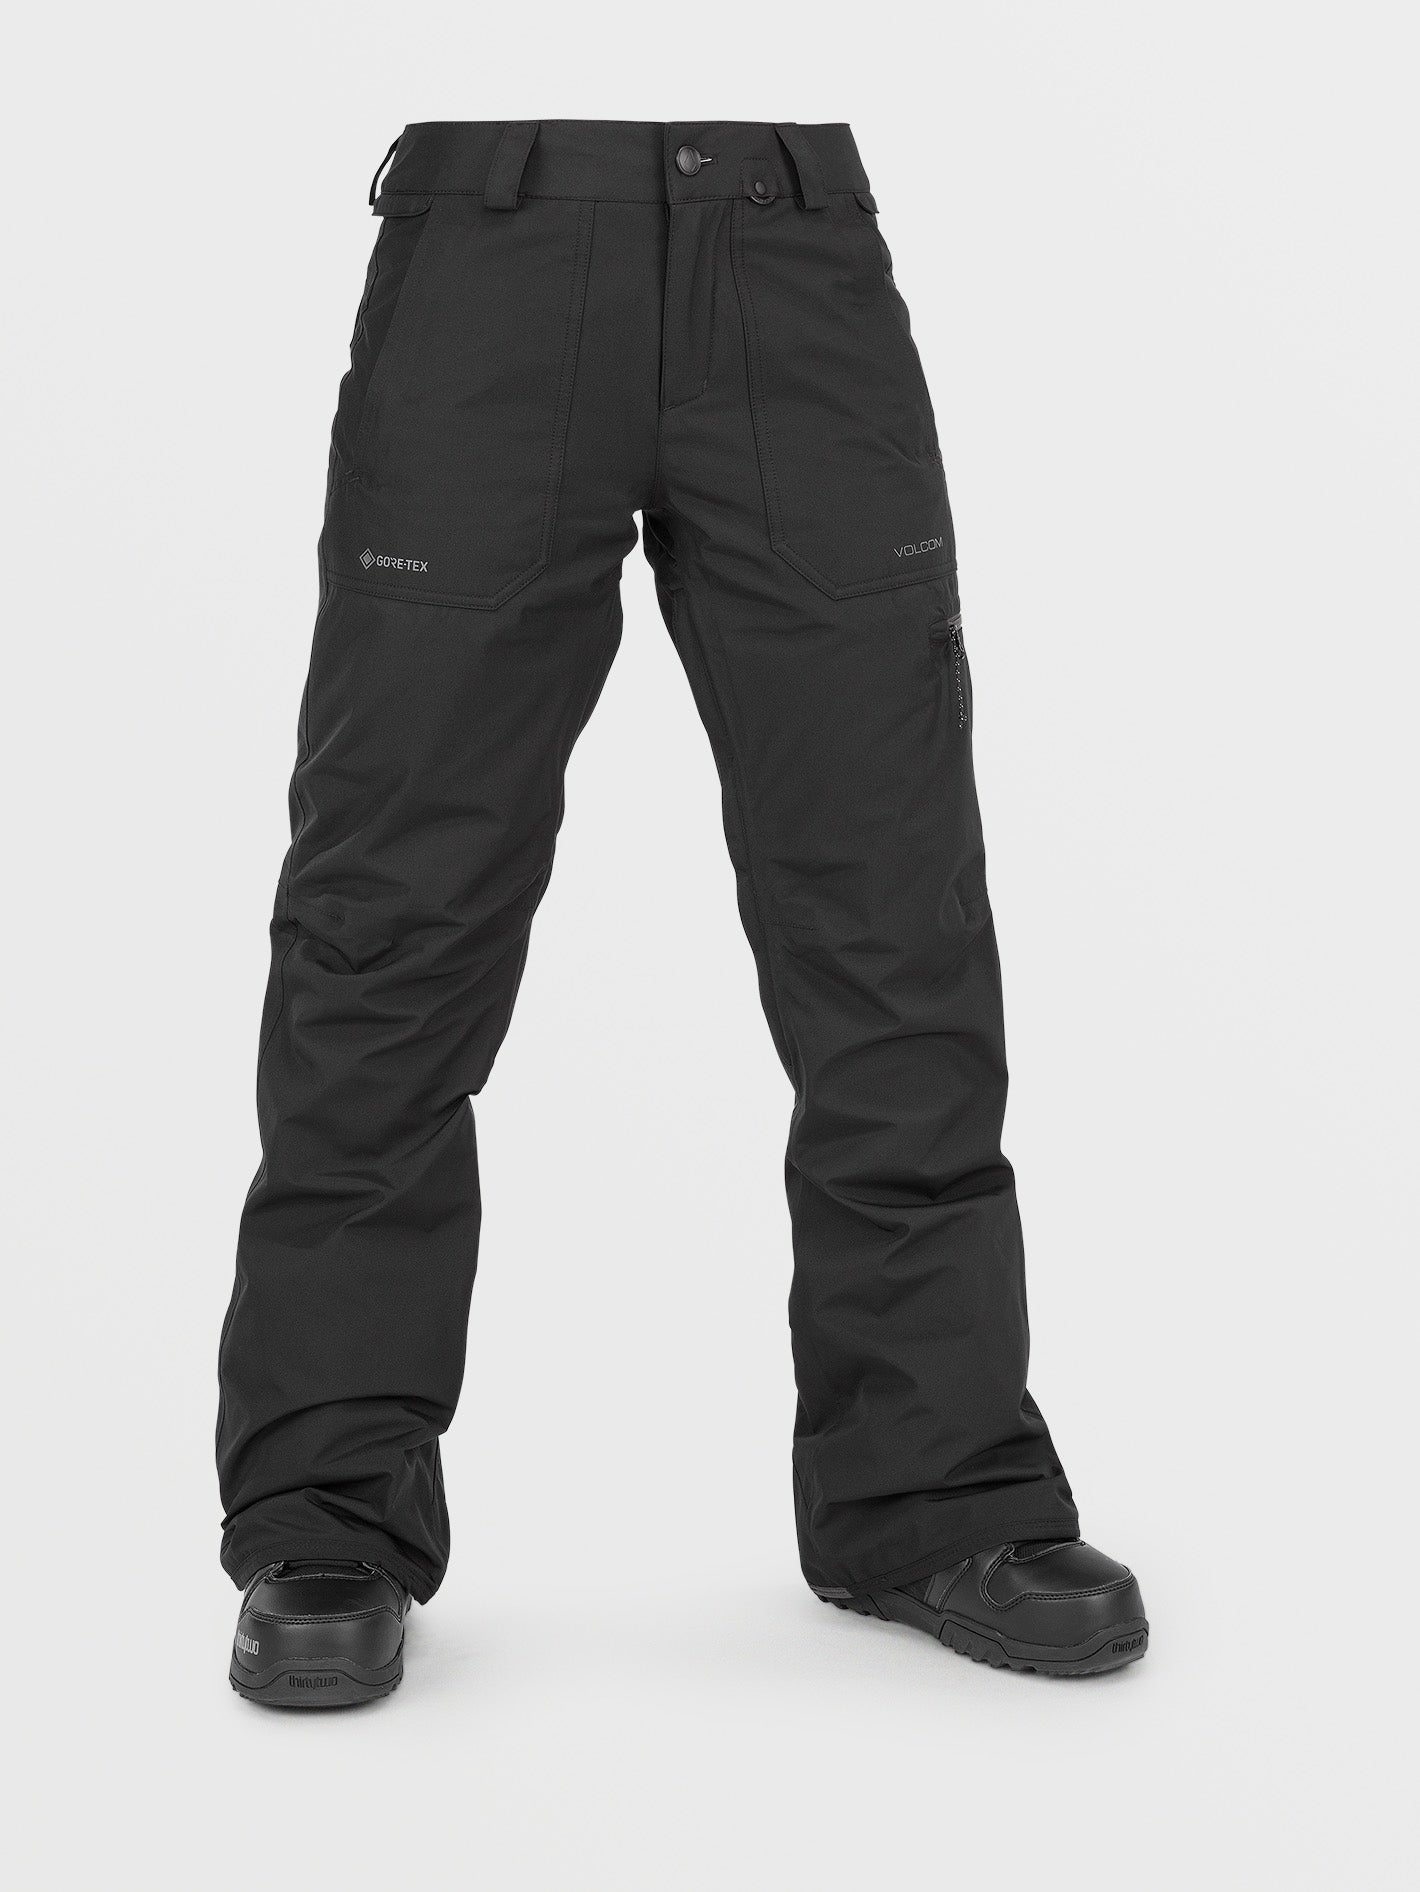 Womens Knox Insulated Gore-Tex Pants - Black